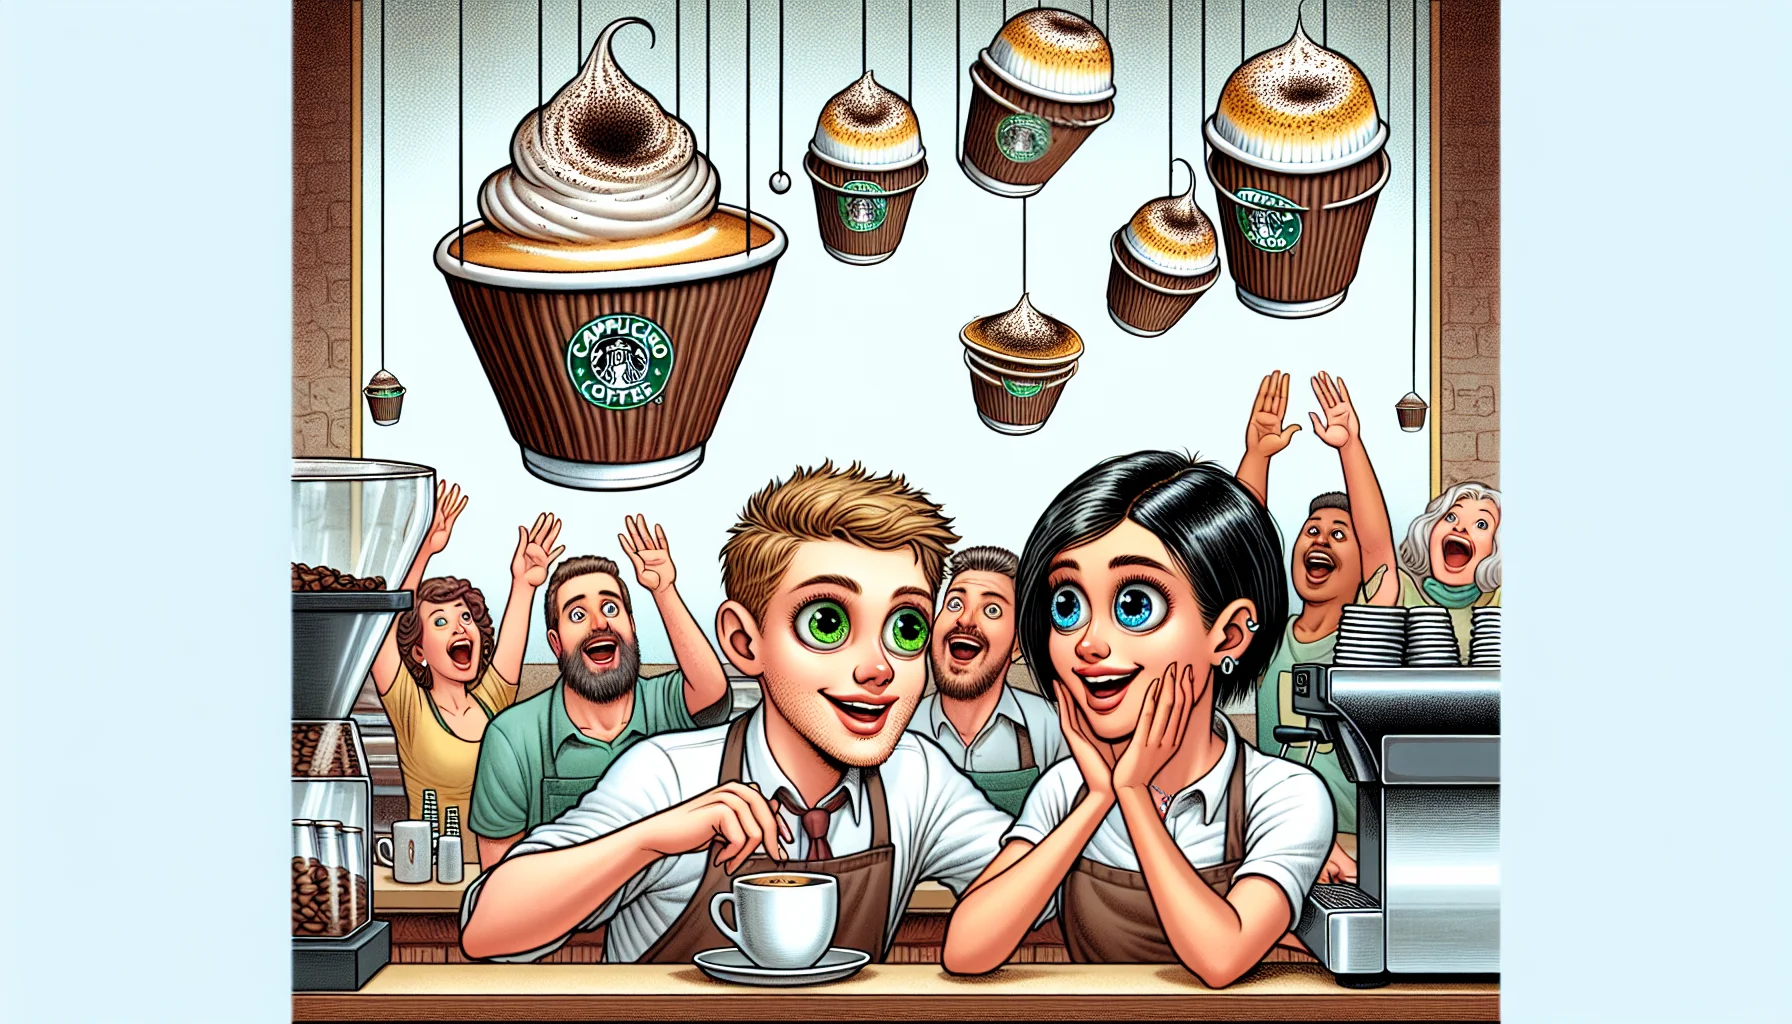 Create a humorous scenario featuring cappuccino K cups. The setting is a lively coffee shop, where a Caucasian male barista with green eyes and brown hair, alongside a South Asian female barista with speckled gray eyes and a pixie cut, are serving. Both of them are fascinated and amused by the incoming K cups, looking like tiny parachutes descending from above towards the beloved espresso machine. Patrons cheer in the background, mesmerized by the spectacle. The cappuccino K cups are drawn in meticulous detail, radiating a sense of warmth and frothy goodness. The humorous charm of the scene encourages viewers to enjoy a cup of their own.